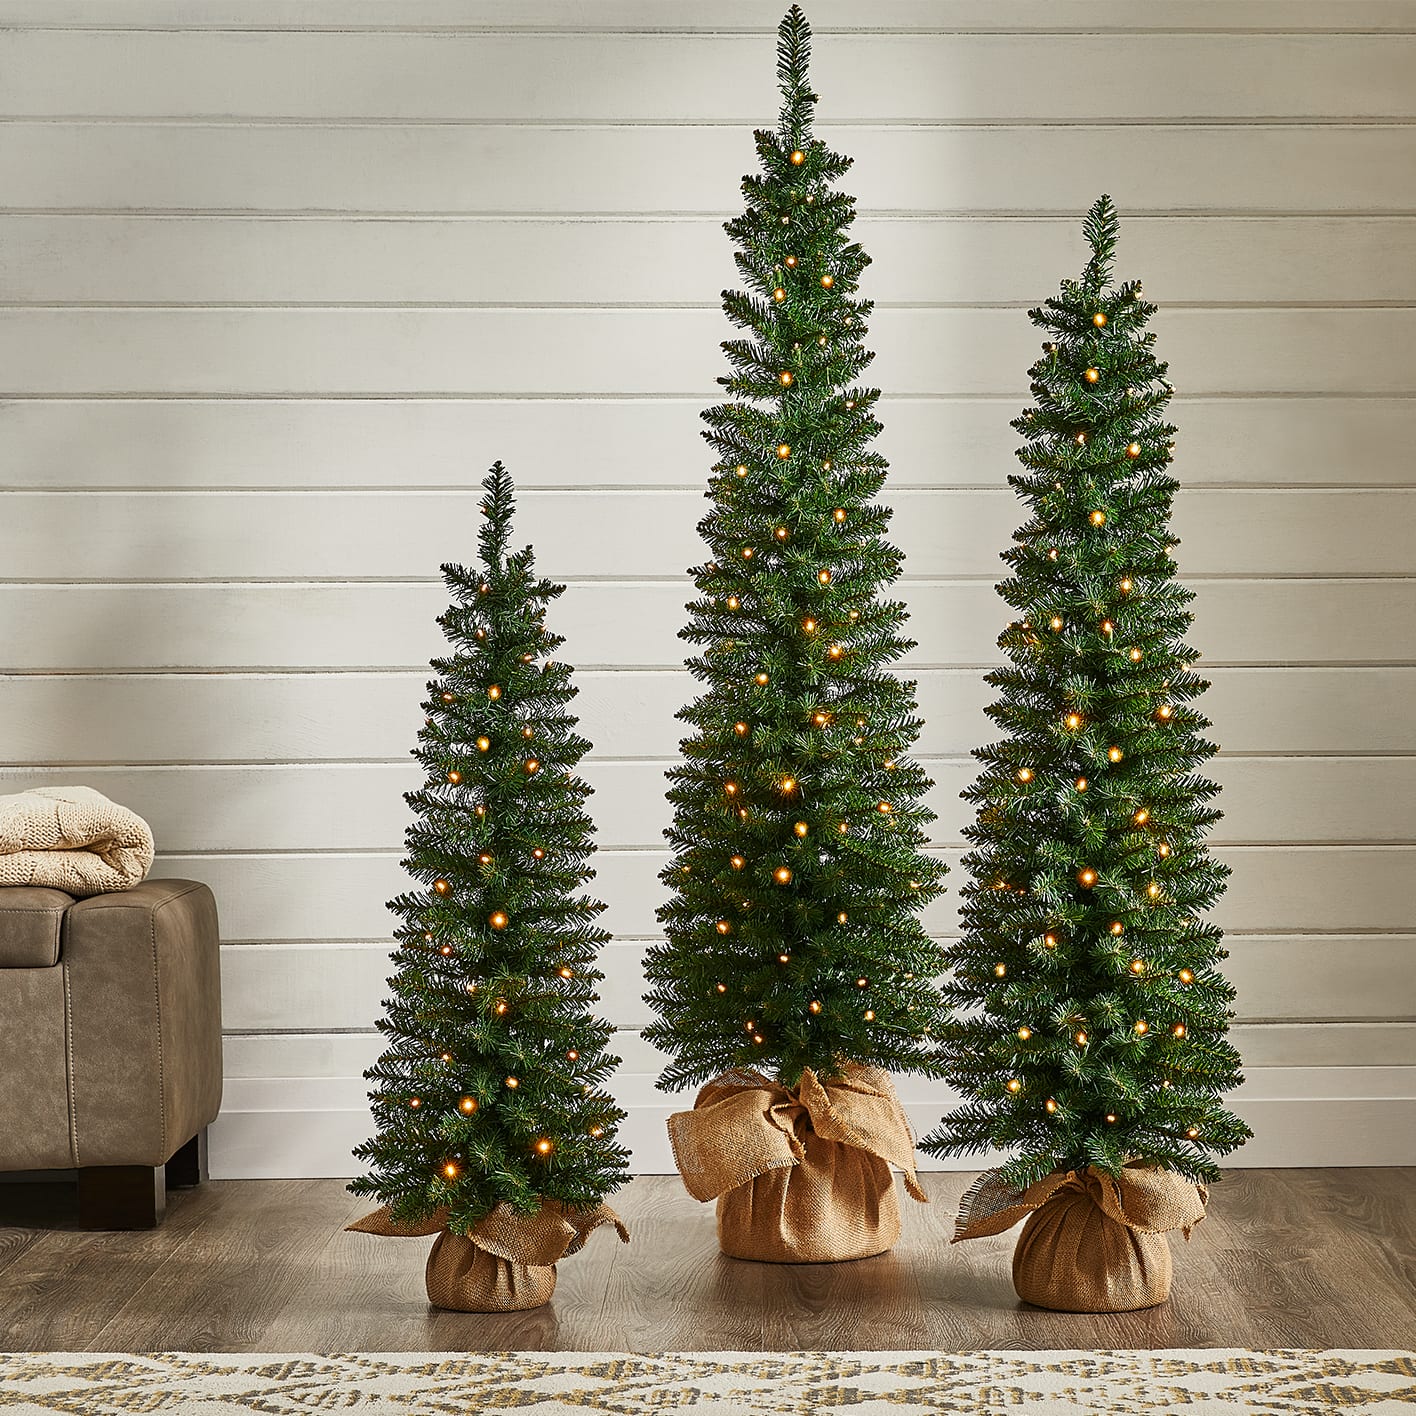 NOMA Carlisle 3-Pack tree with different heights displayed on a living room floor.